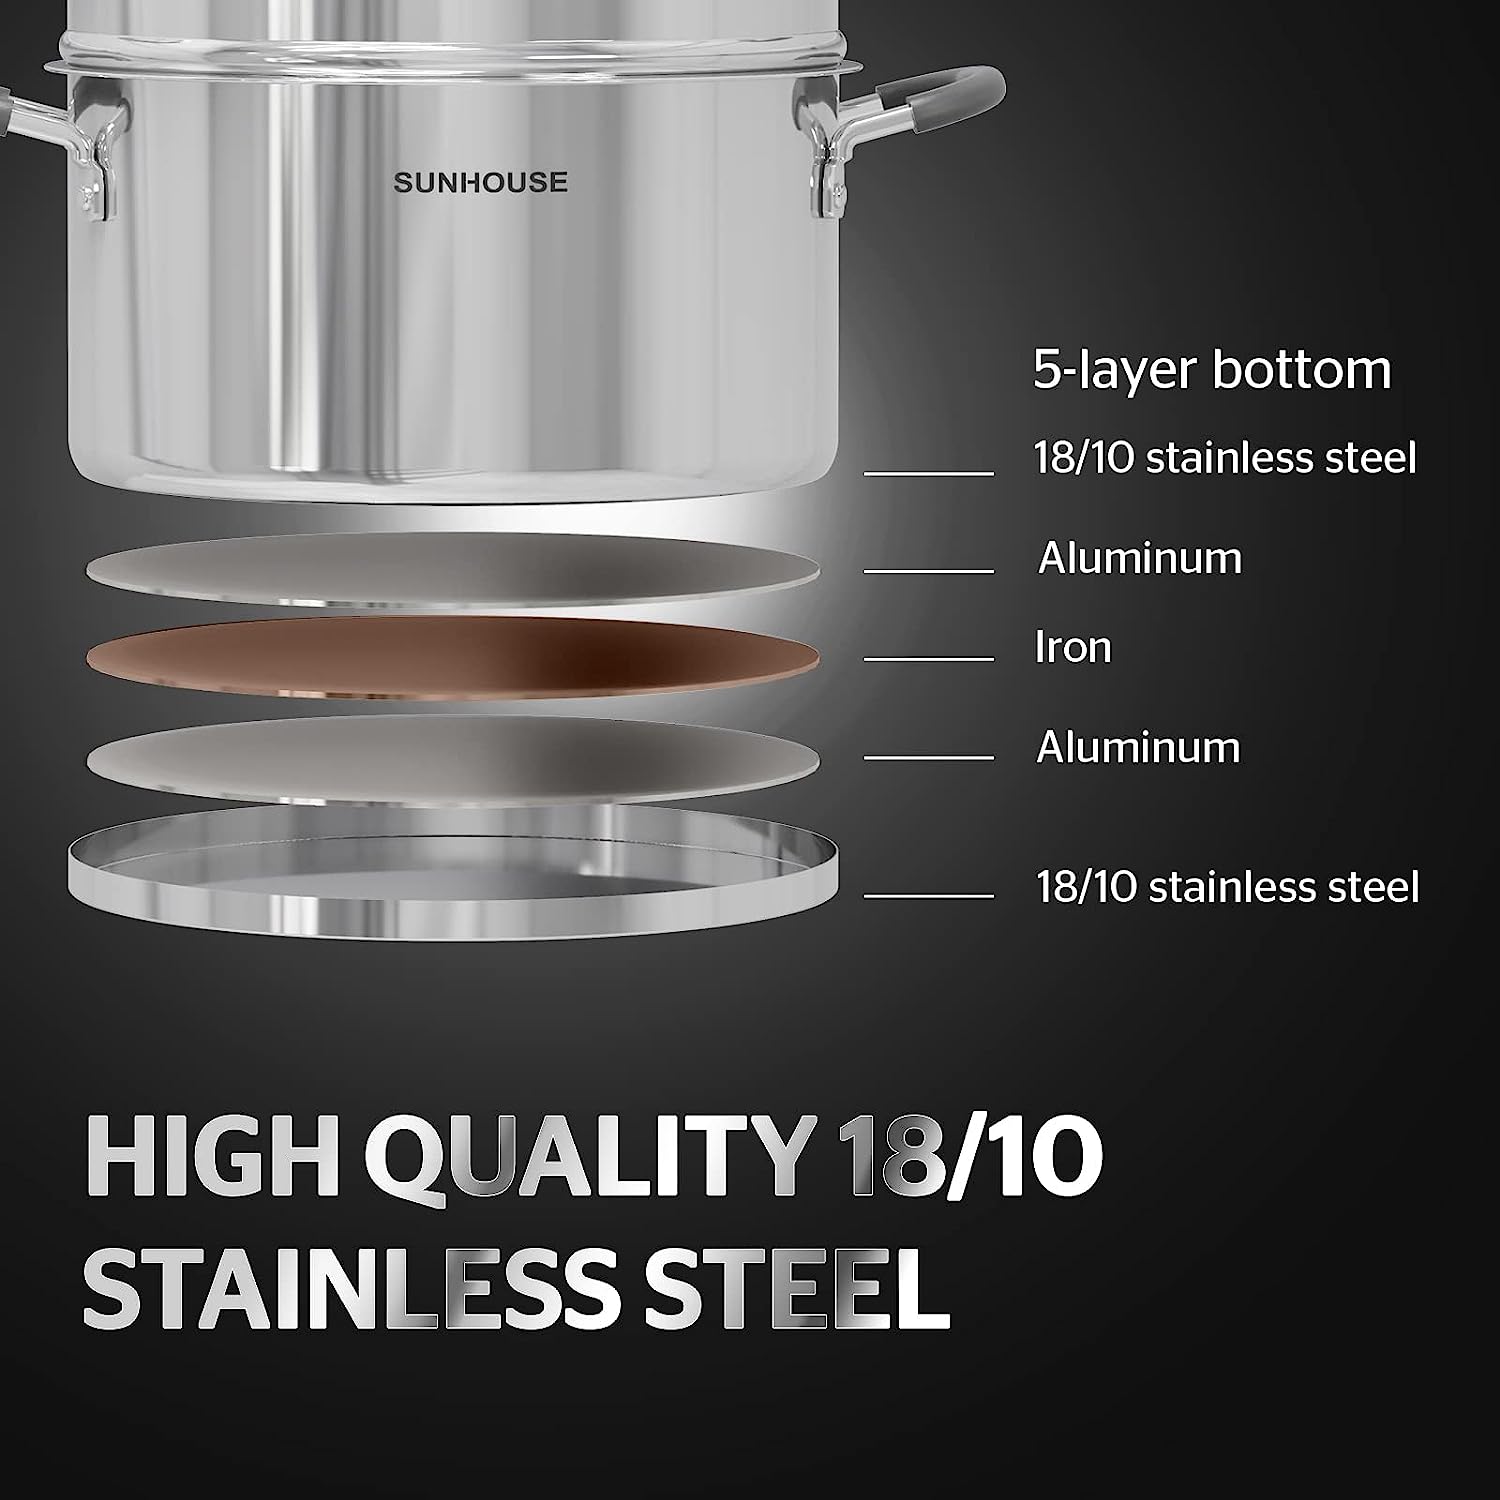  Steamer for Cooking, 18/8 Stainless Steel Steamer Pot, Food  Steamer 11 inch Steam Pots with Lid 2-tier for Cooking Vegetables, Seafood,  Soups, Stews and Pasta: Home & Kitchen